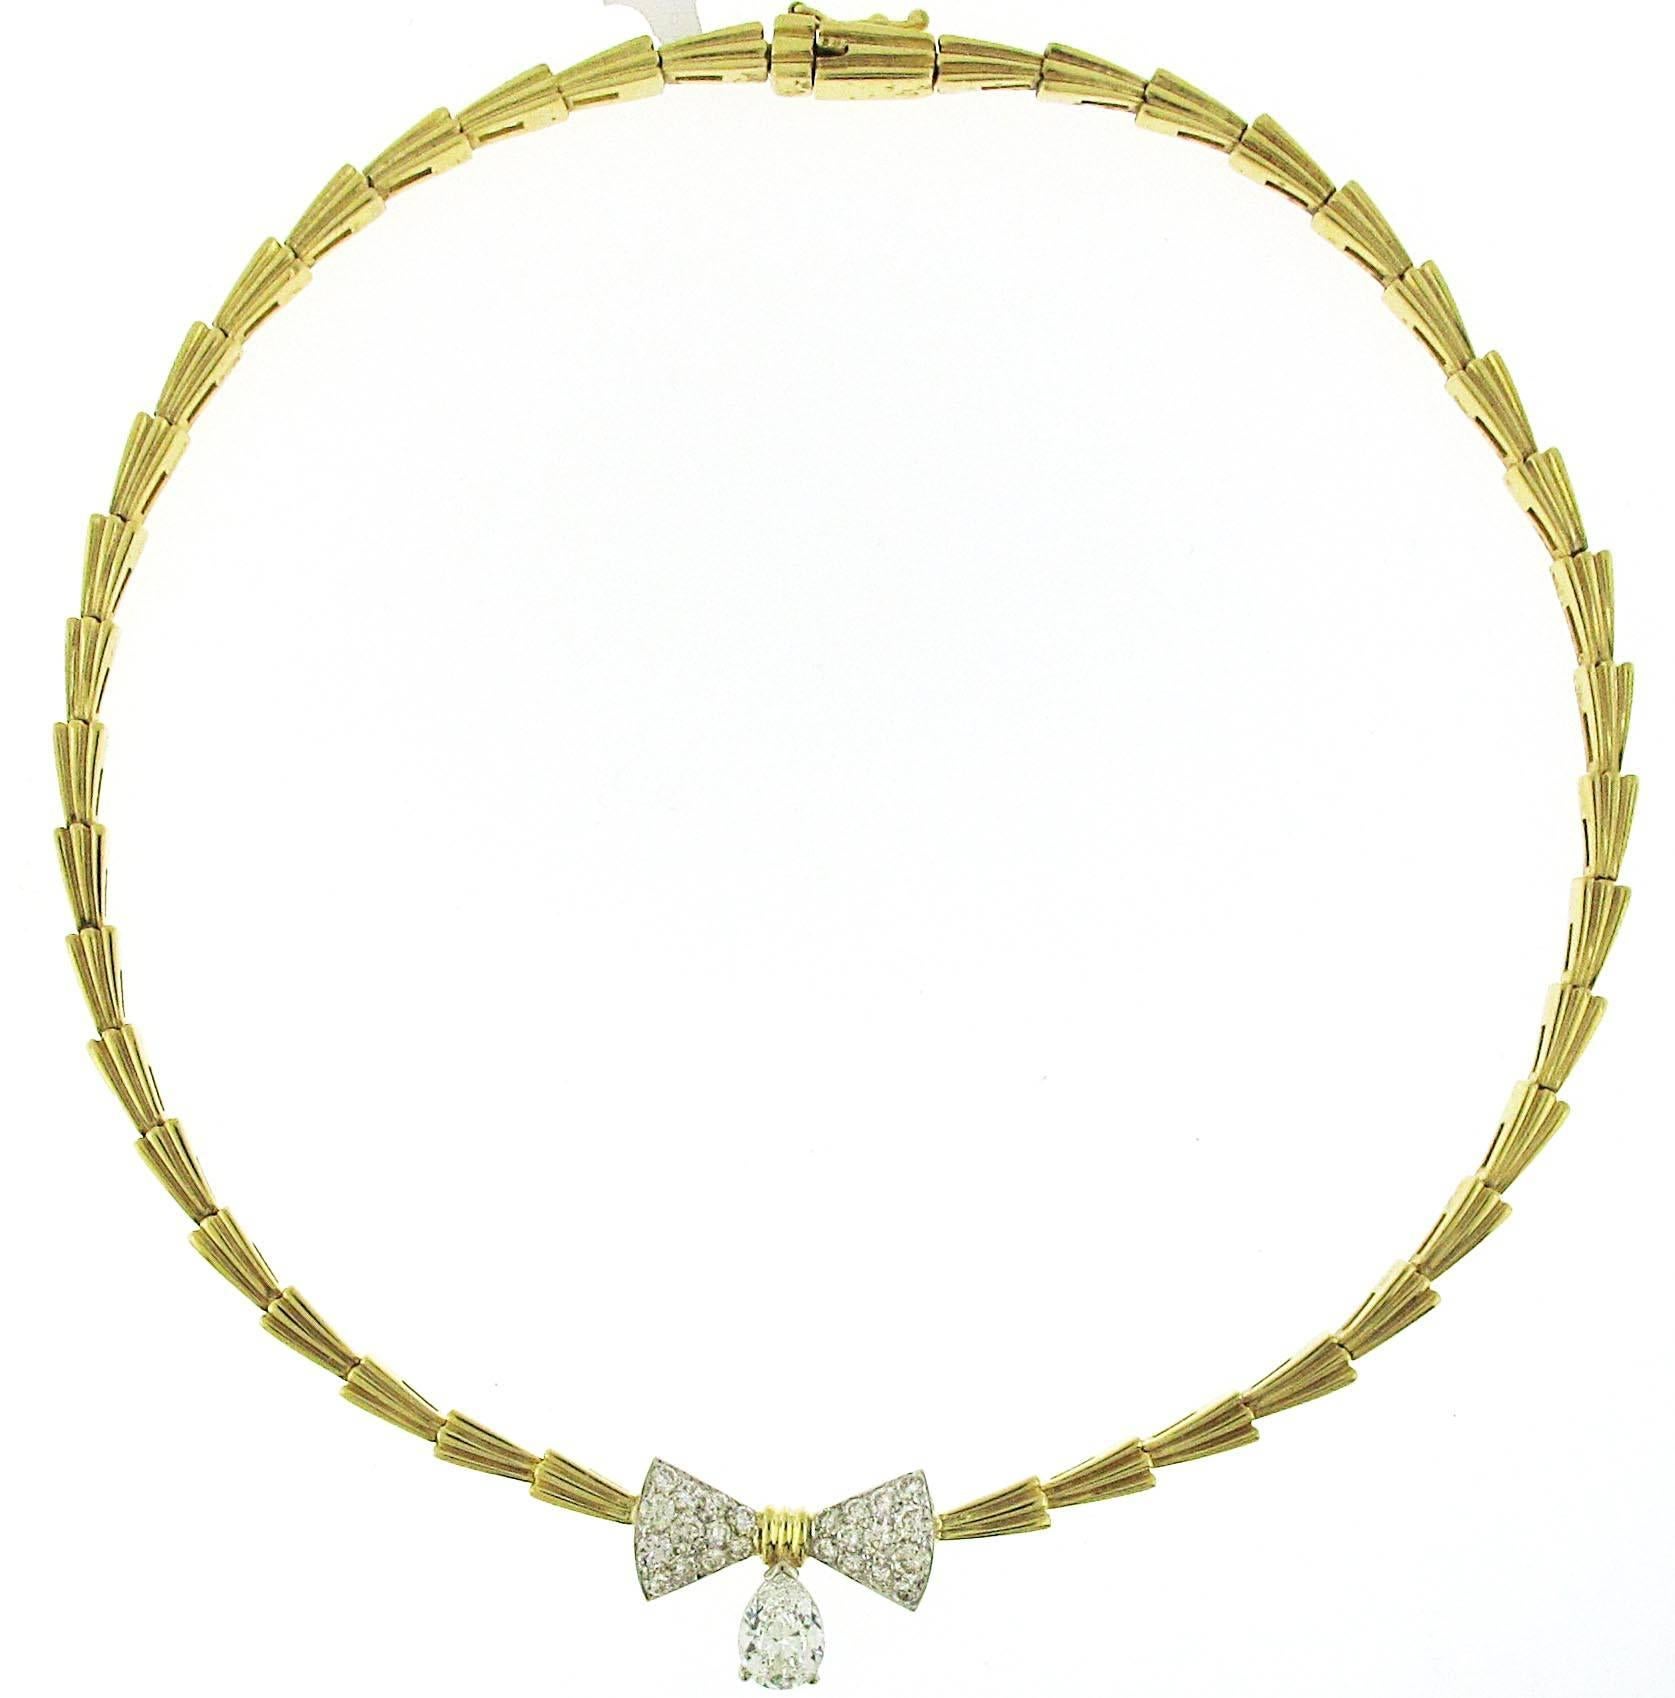 The perfect Valentine's Day necklace. This gorgeous 1.51 ct center stone is adorned with over 1 carat of fine white diamonds creating the bow shape. The necklace is 18kt yellow gold which is a must higher quality than a similar necklace in 14kt